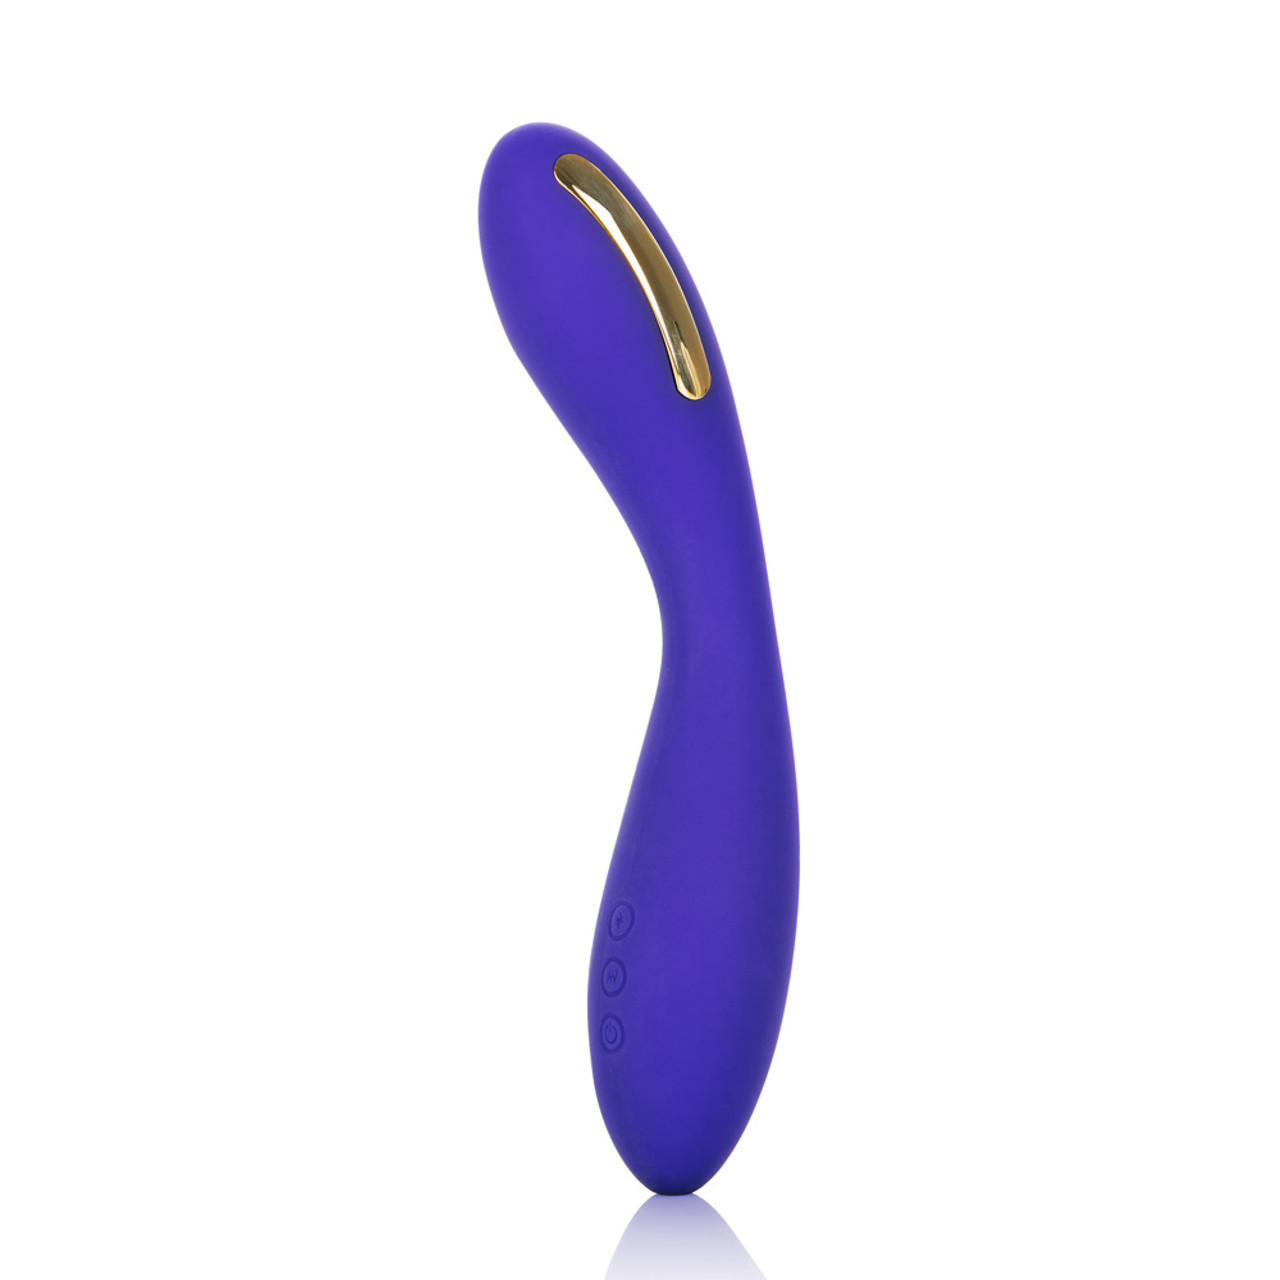 https://cdn11.bigcommerce.com/s-rph88/images/stencil/1280x1280/products/21738/175454/SE063015-cal-exotics-impulse-intimate-e-stimulator-rechargeable-silicone-wand-massager_9__52156.1611608238.jpg?c=2